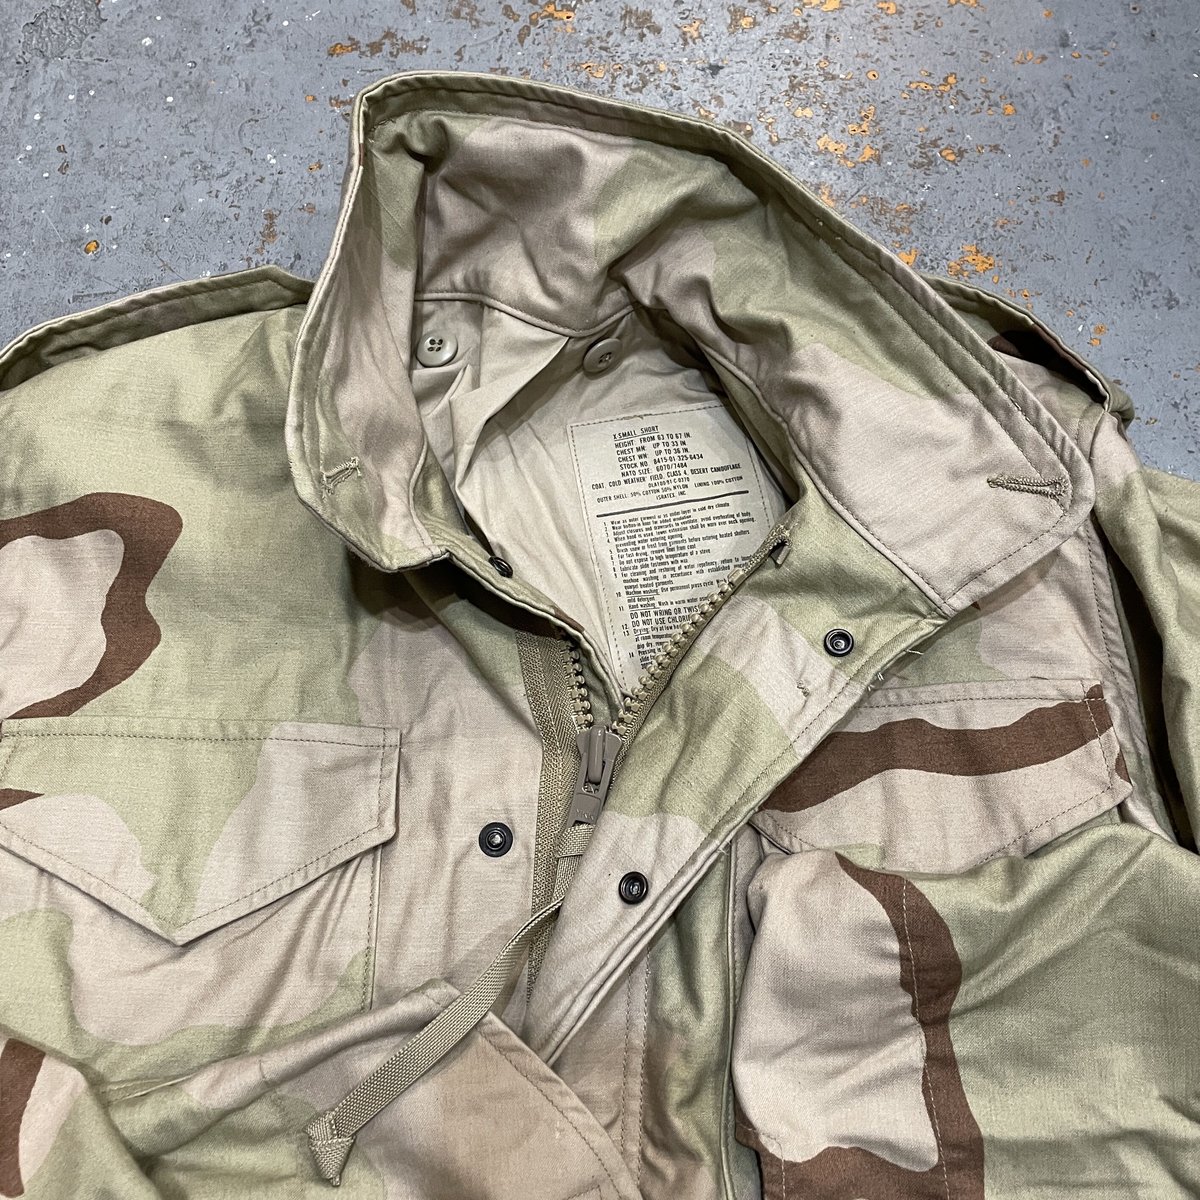 [Dead Stock] 1991 U.S.ARMY M-65 Field Jacket DESERT CAMOUFLAGE Made in USA  SIZE : X-SMALL SHORT